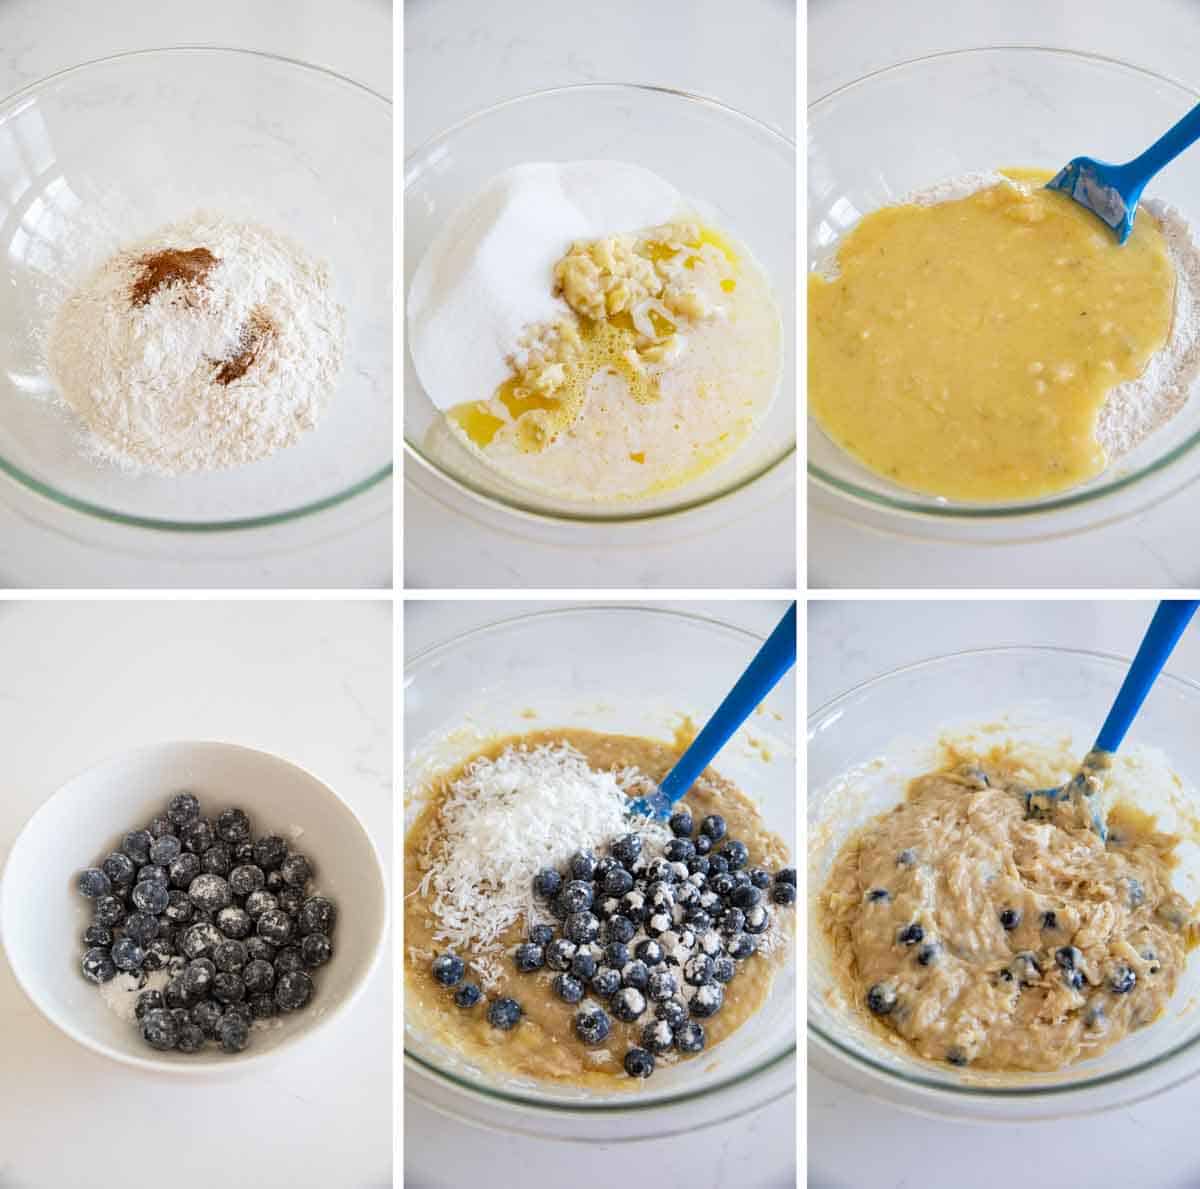 steps to make the batter for blueberry banana bread with coconut.